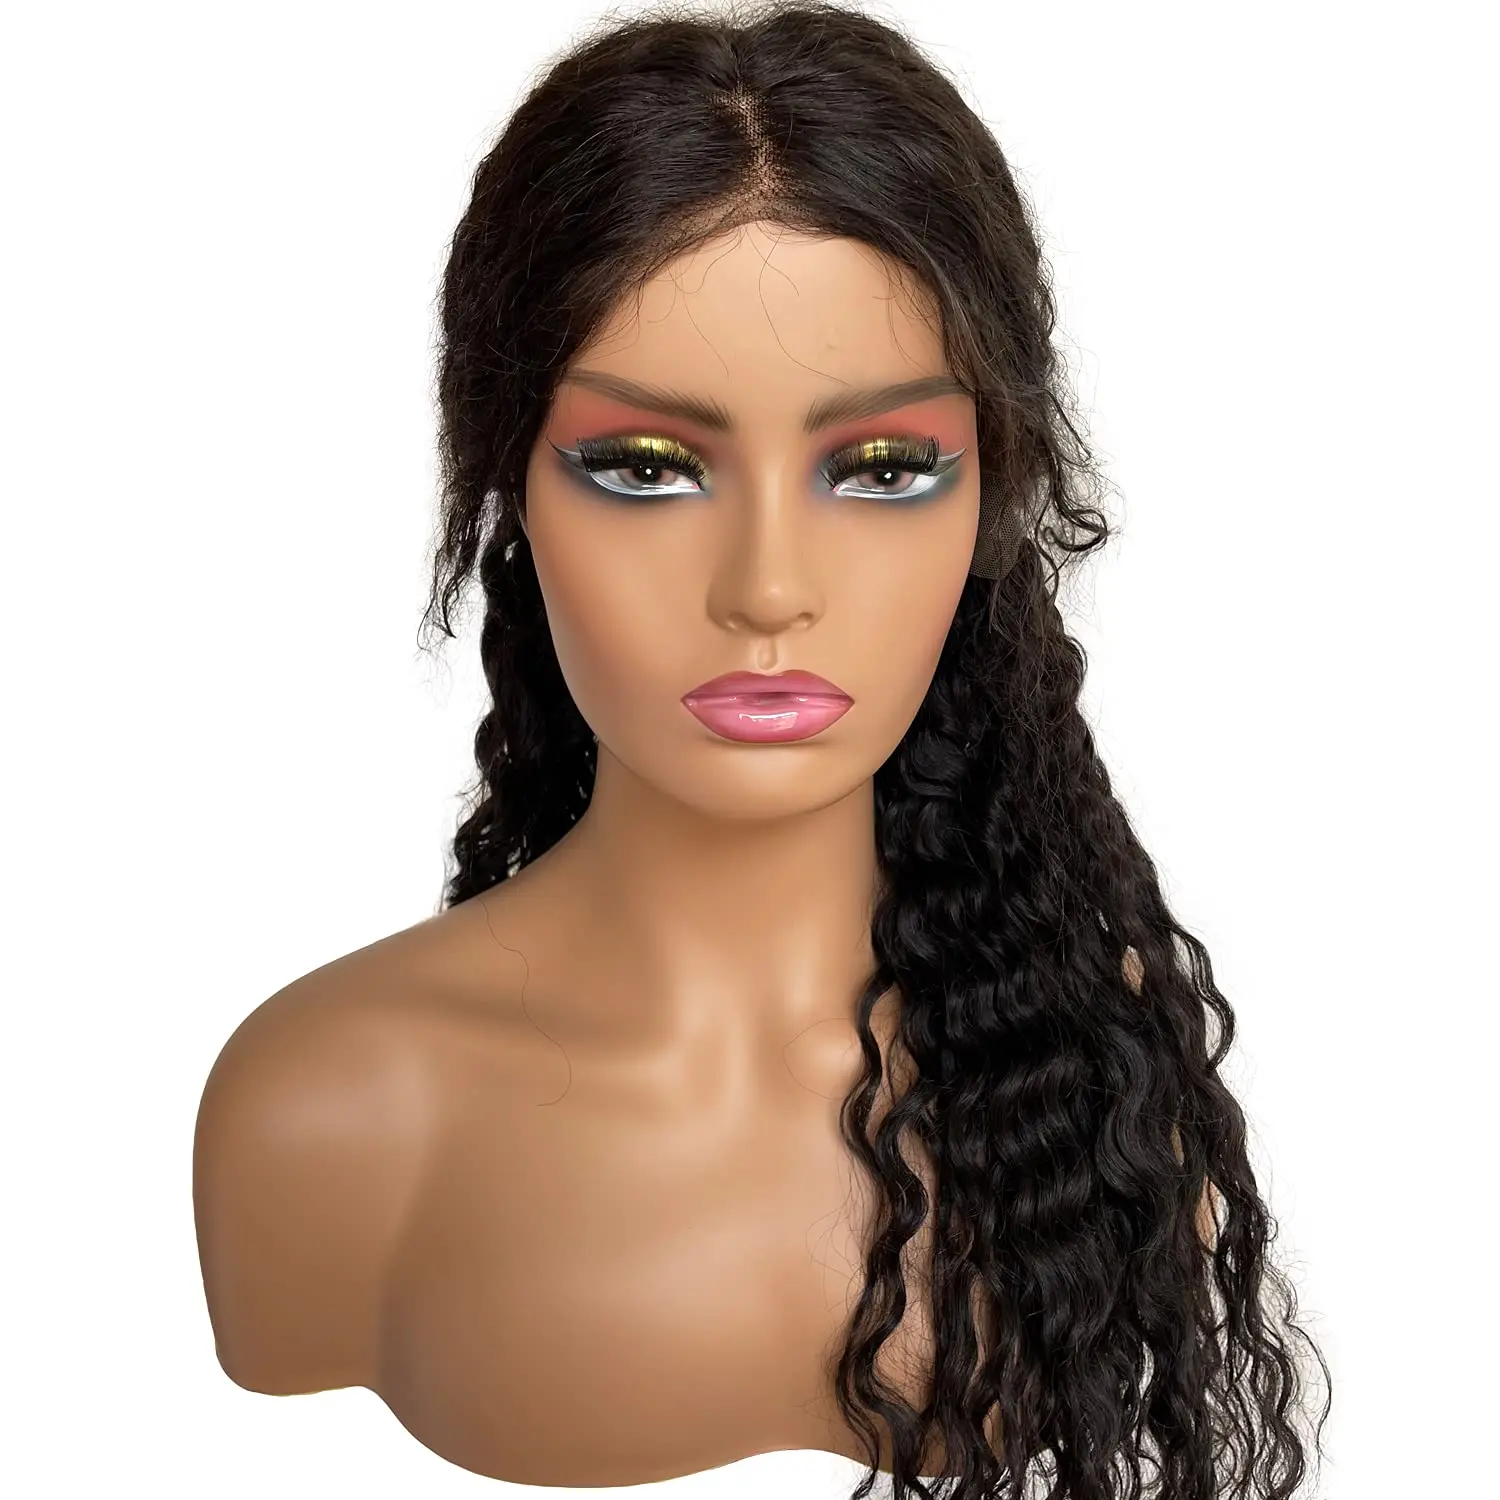 Mannequin PVC Manikin Head Realistic Mannequin Head Bust Wig Mask Stand for Wigs Display Making Styling Light Brown